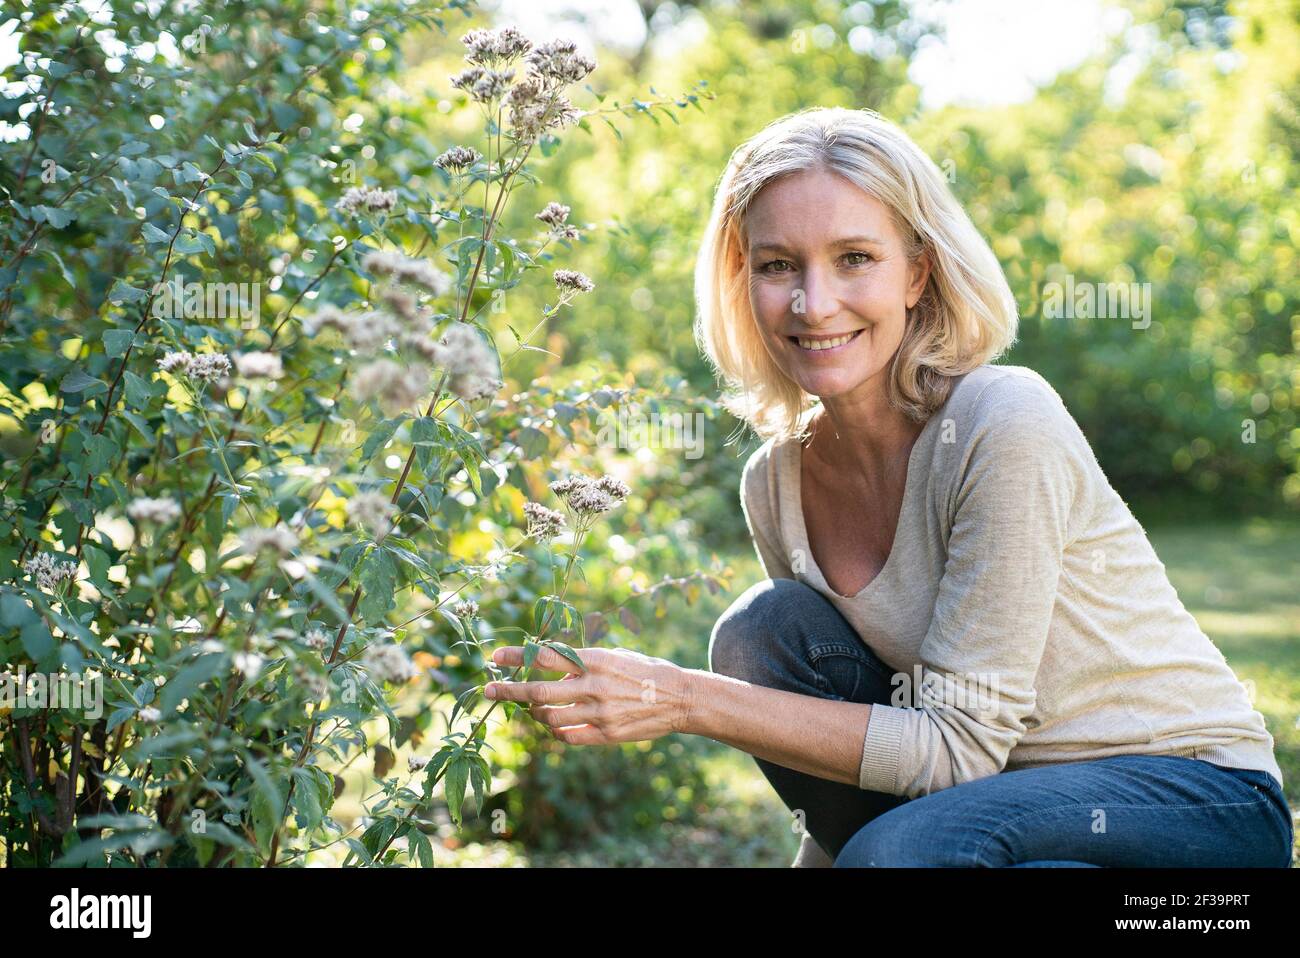 Portrait of smiling mature woman touching plant in backyard Stock Photo